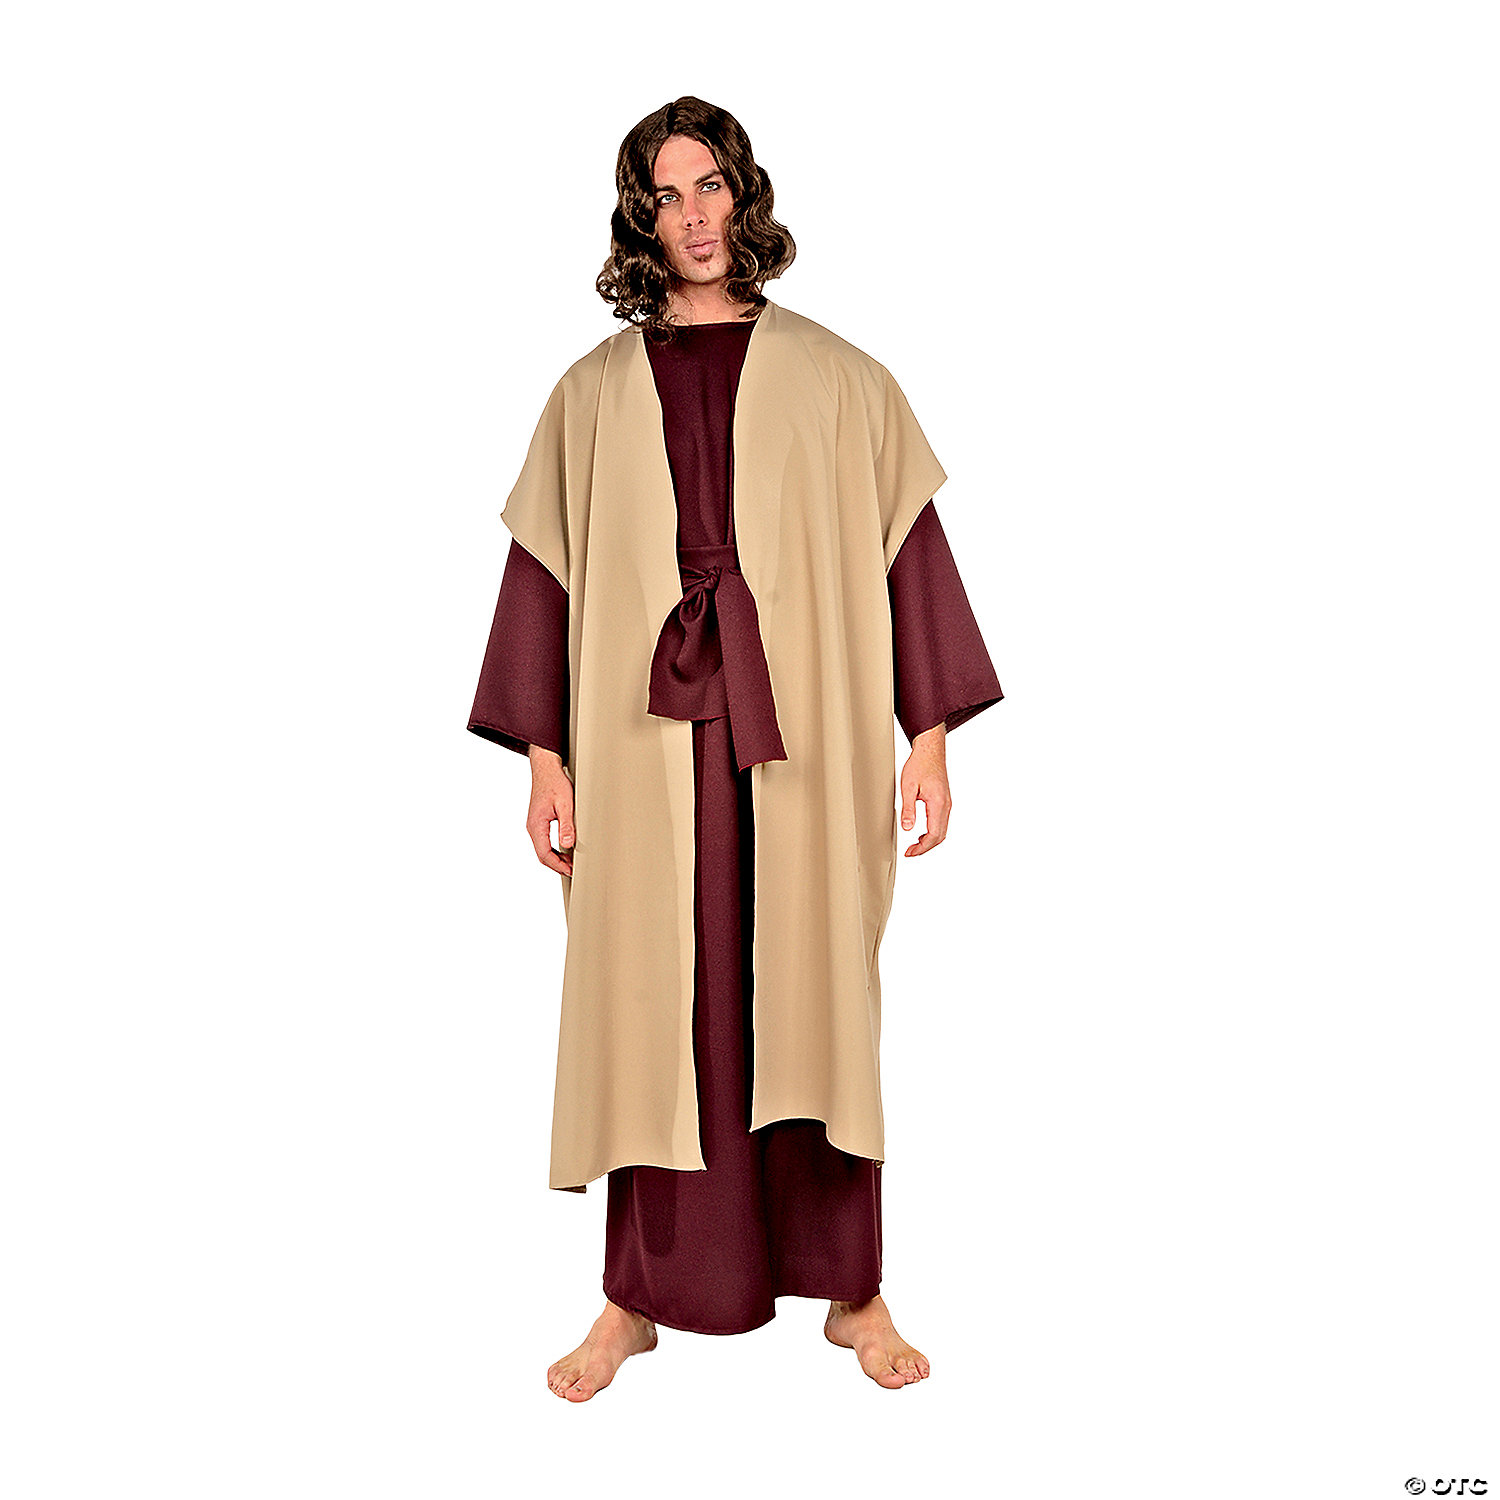 Adult bible character costumes Escorts in bloomington in